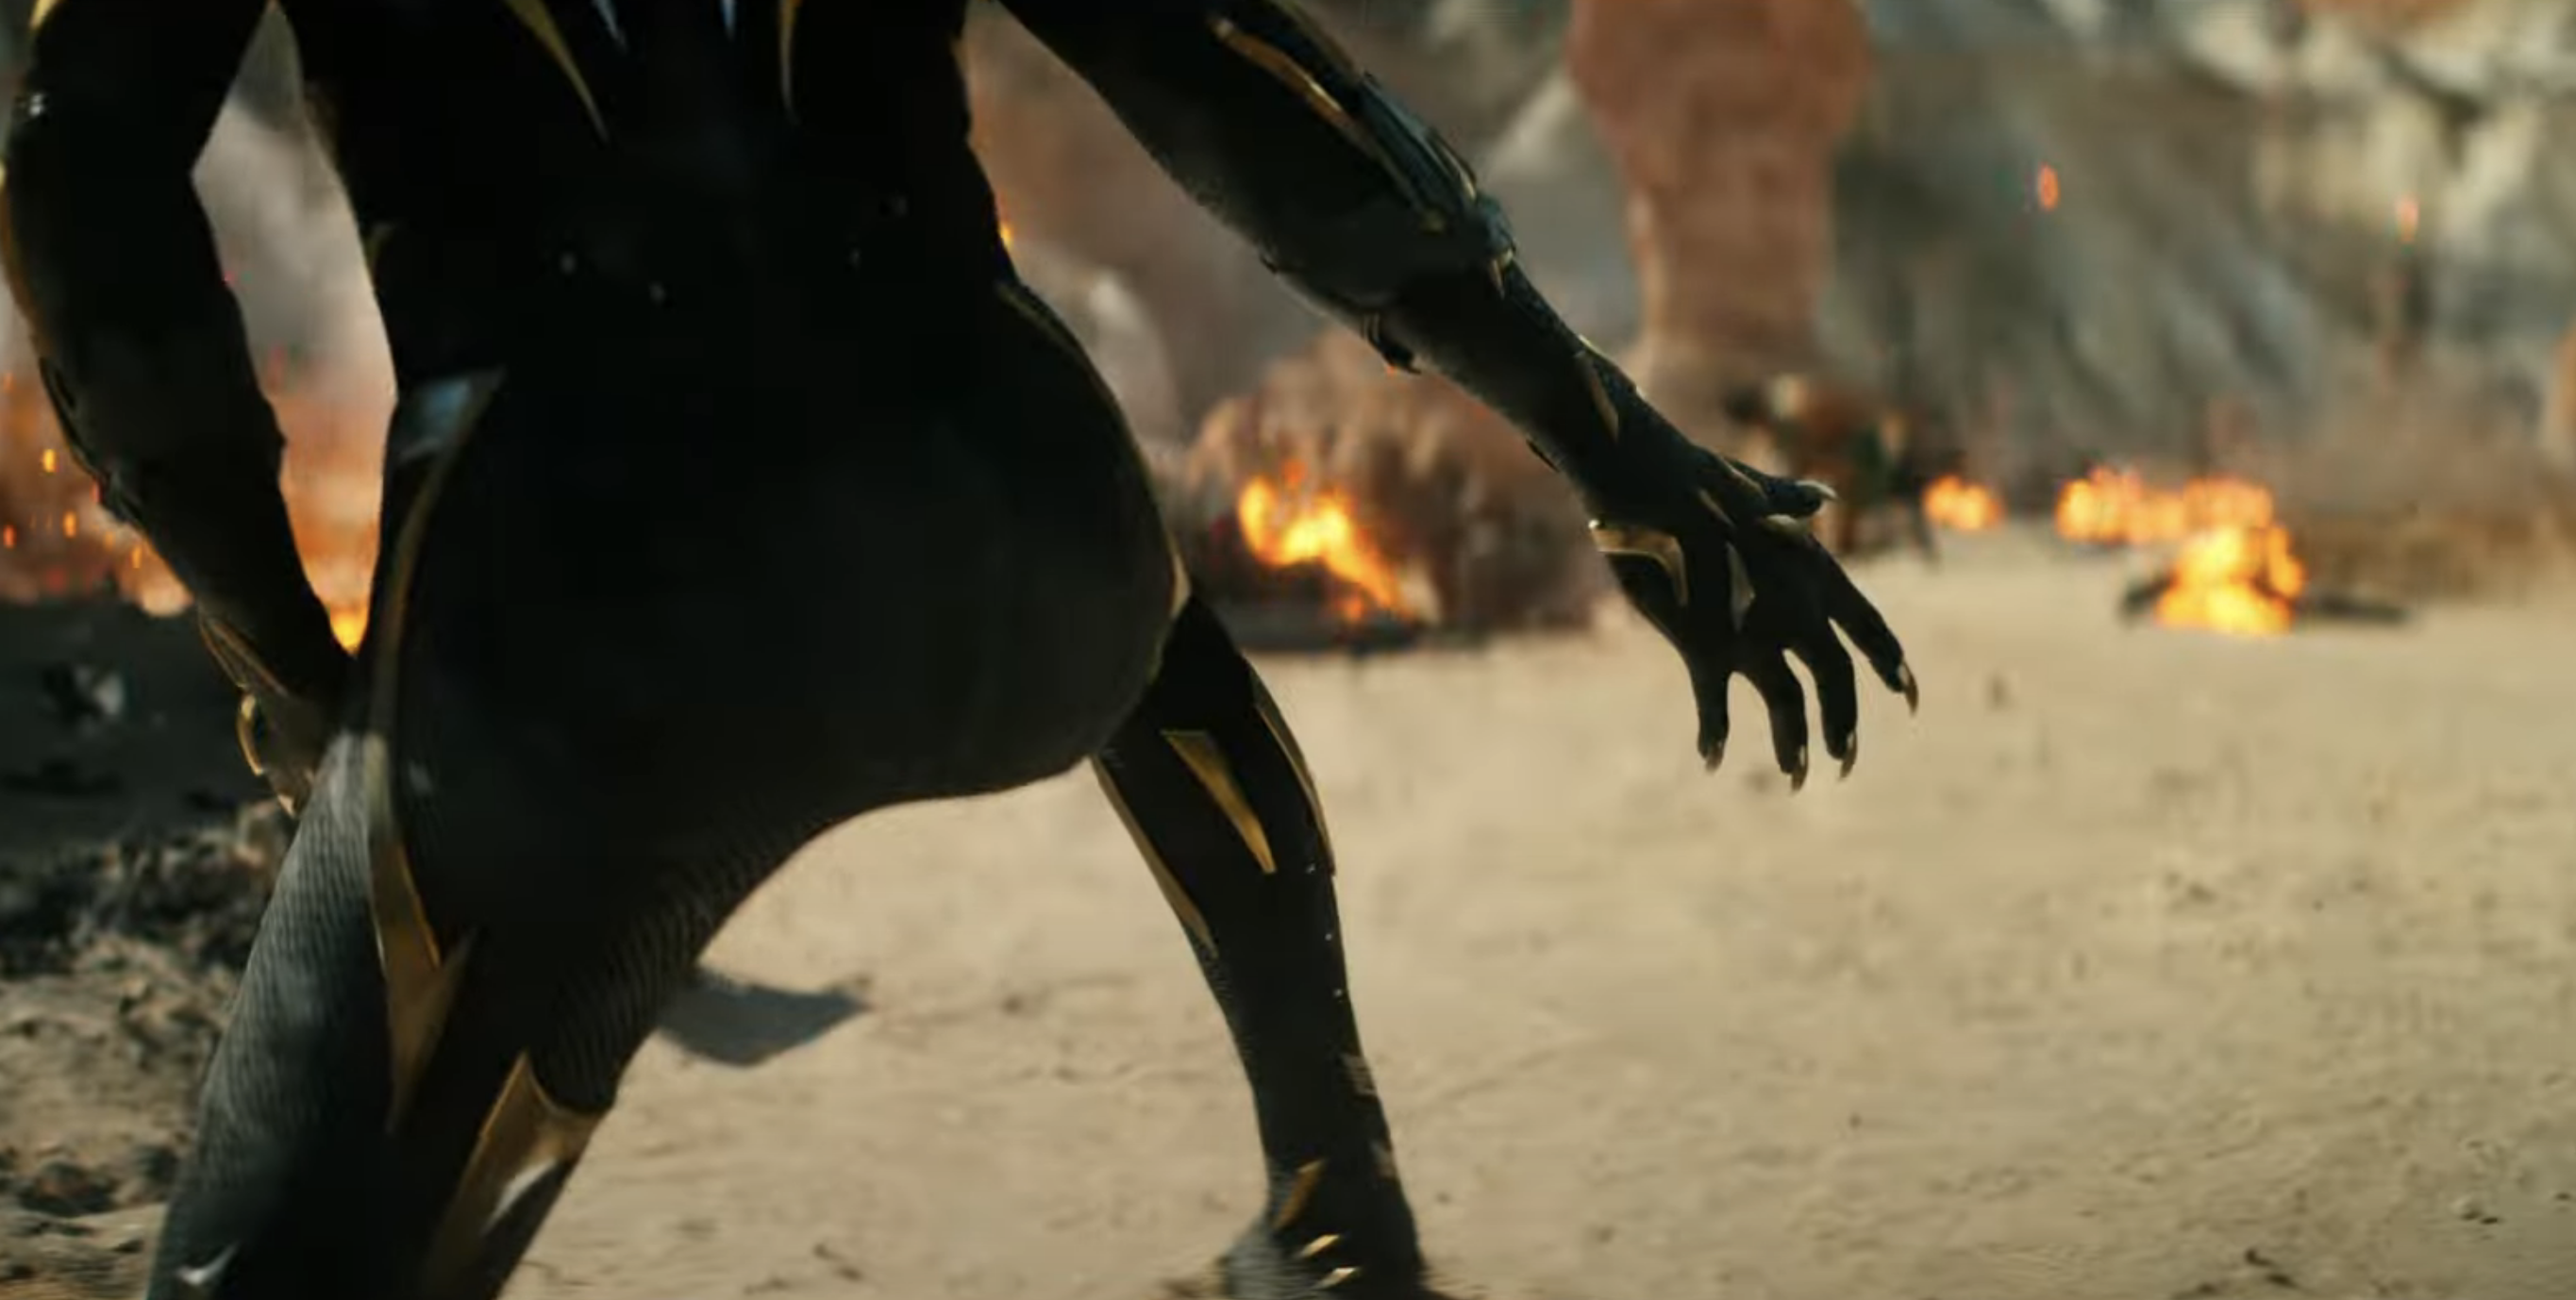 Screen shot of the Black Panther from behind from &quot;Black Panther: Wakanda Forever&quot;